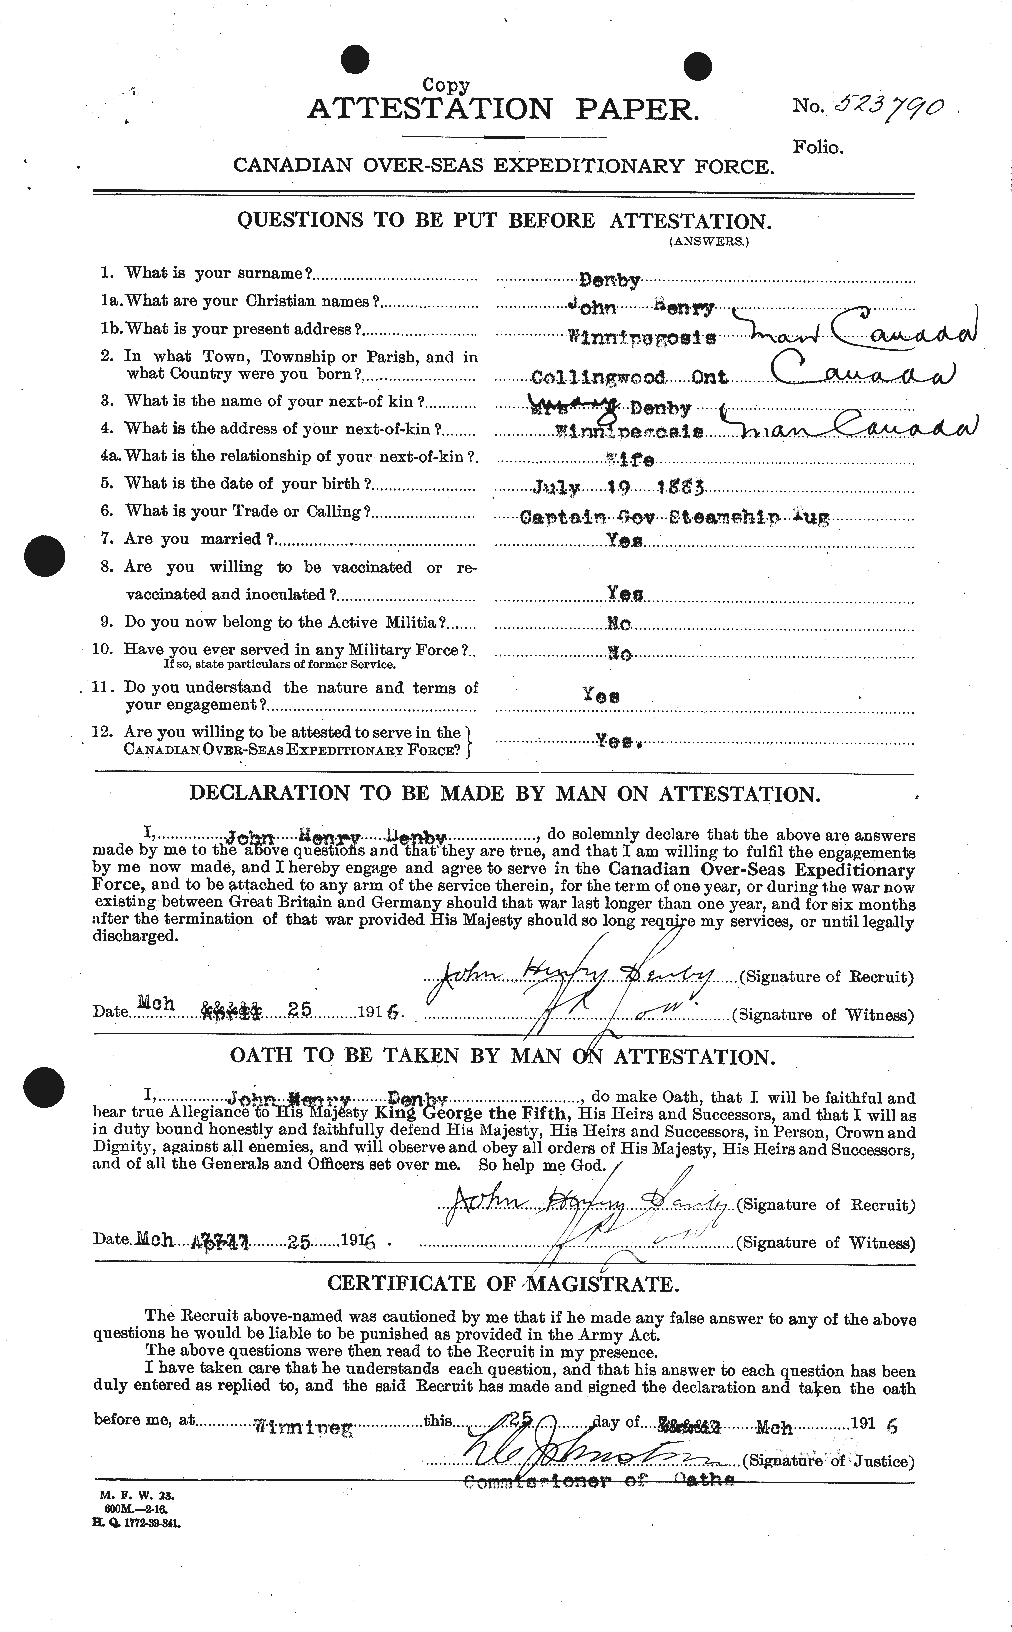 Personnel Records of the First World War - CEF 287846a